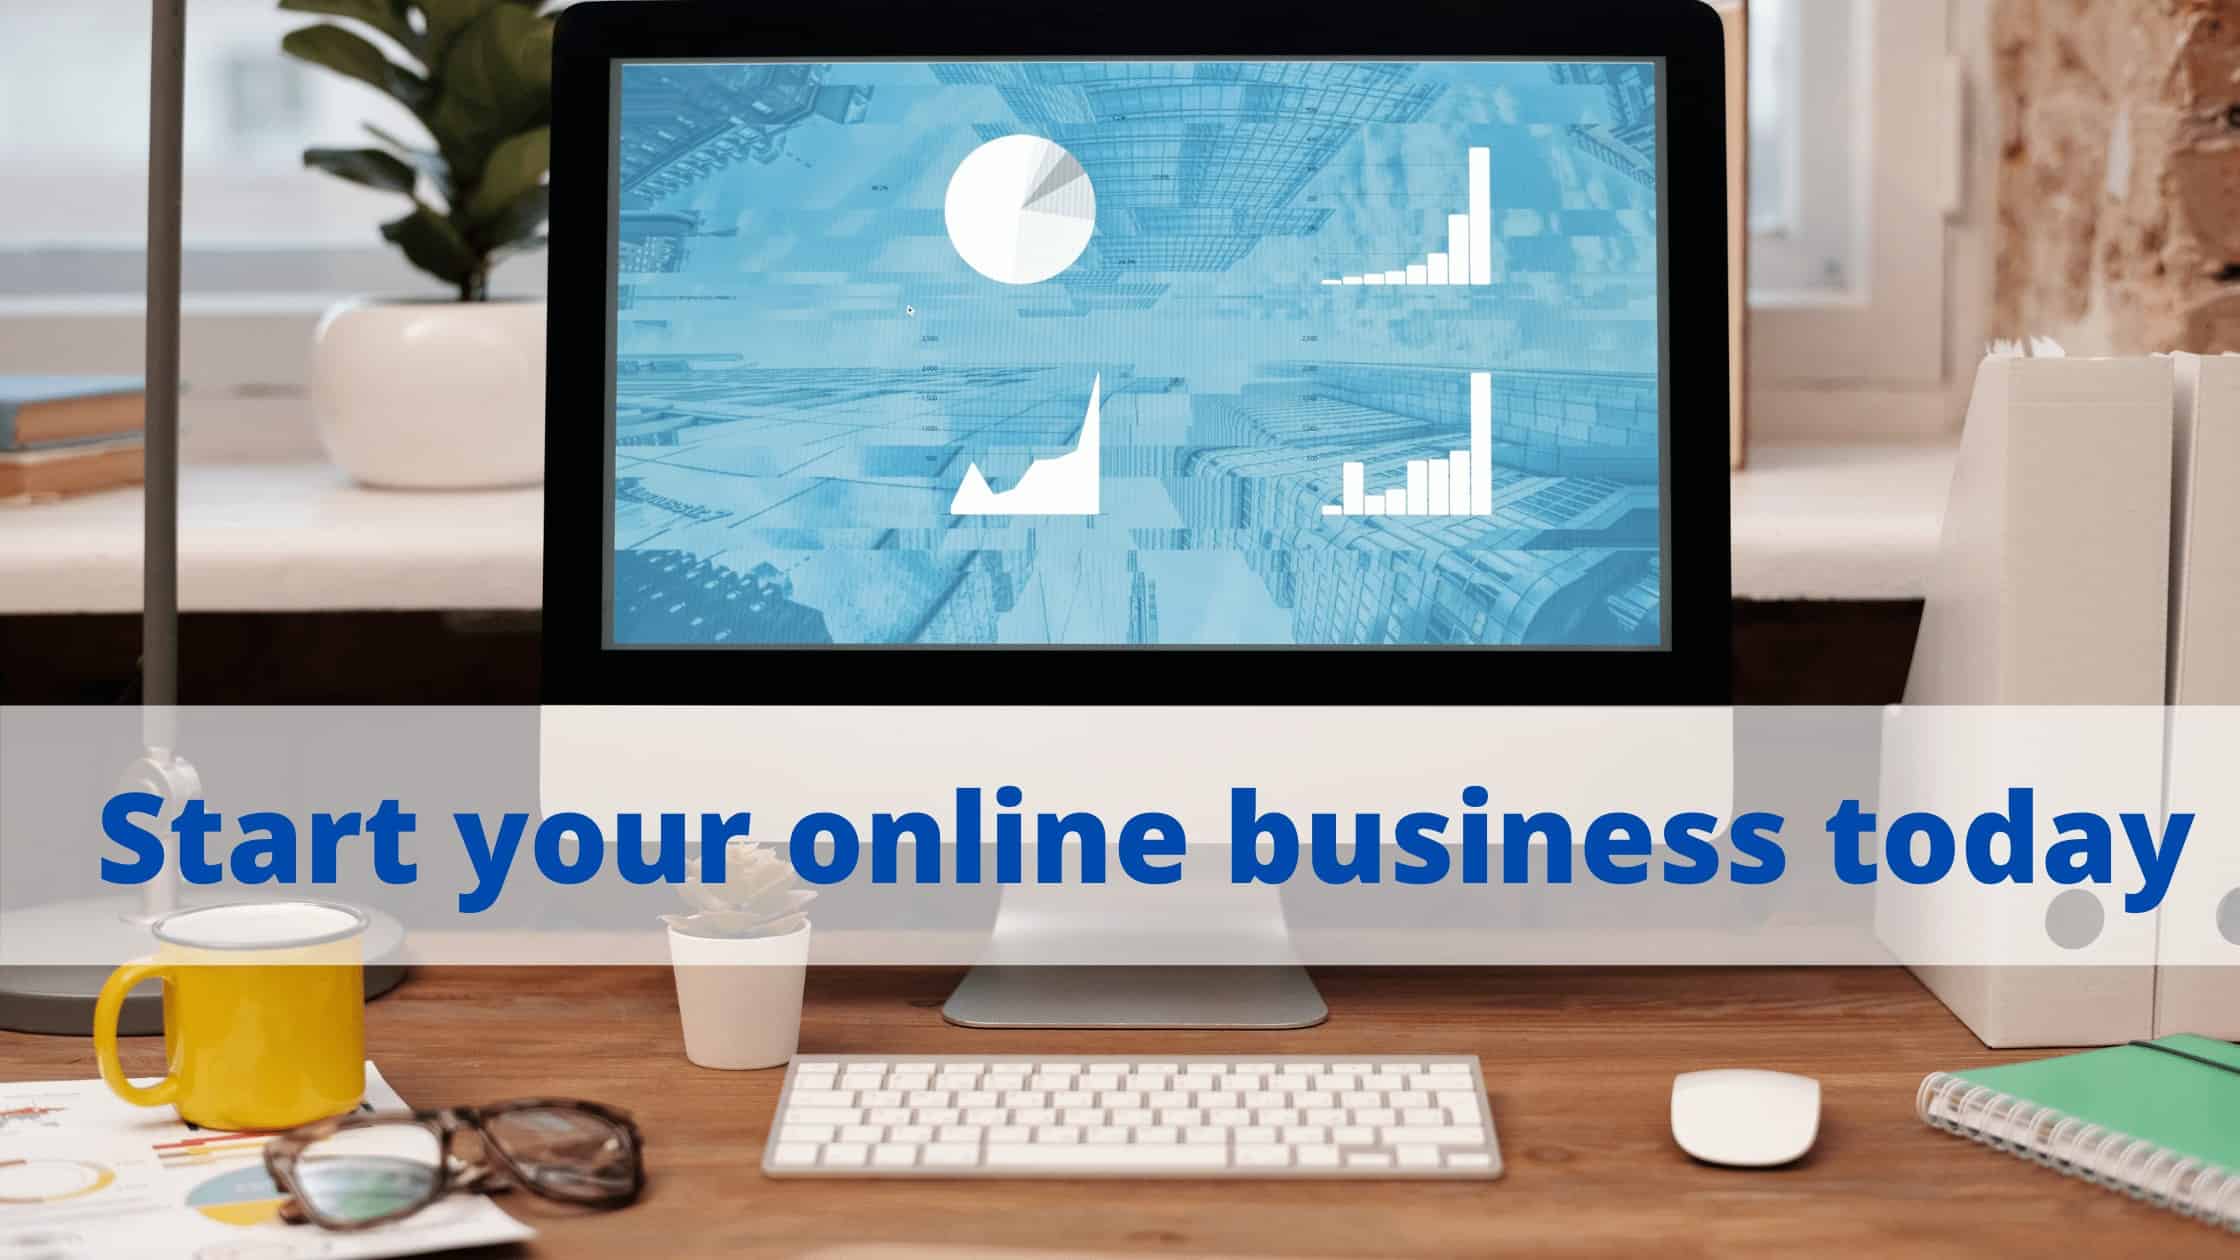 Start your online business today with zero audiences.